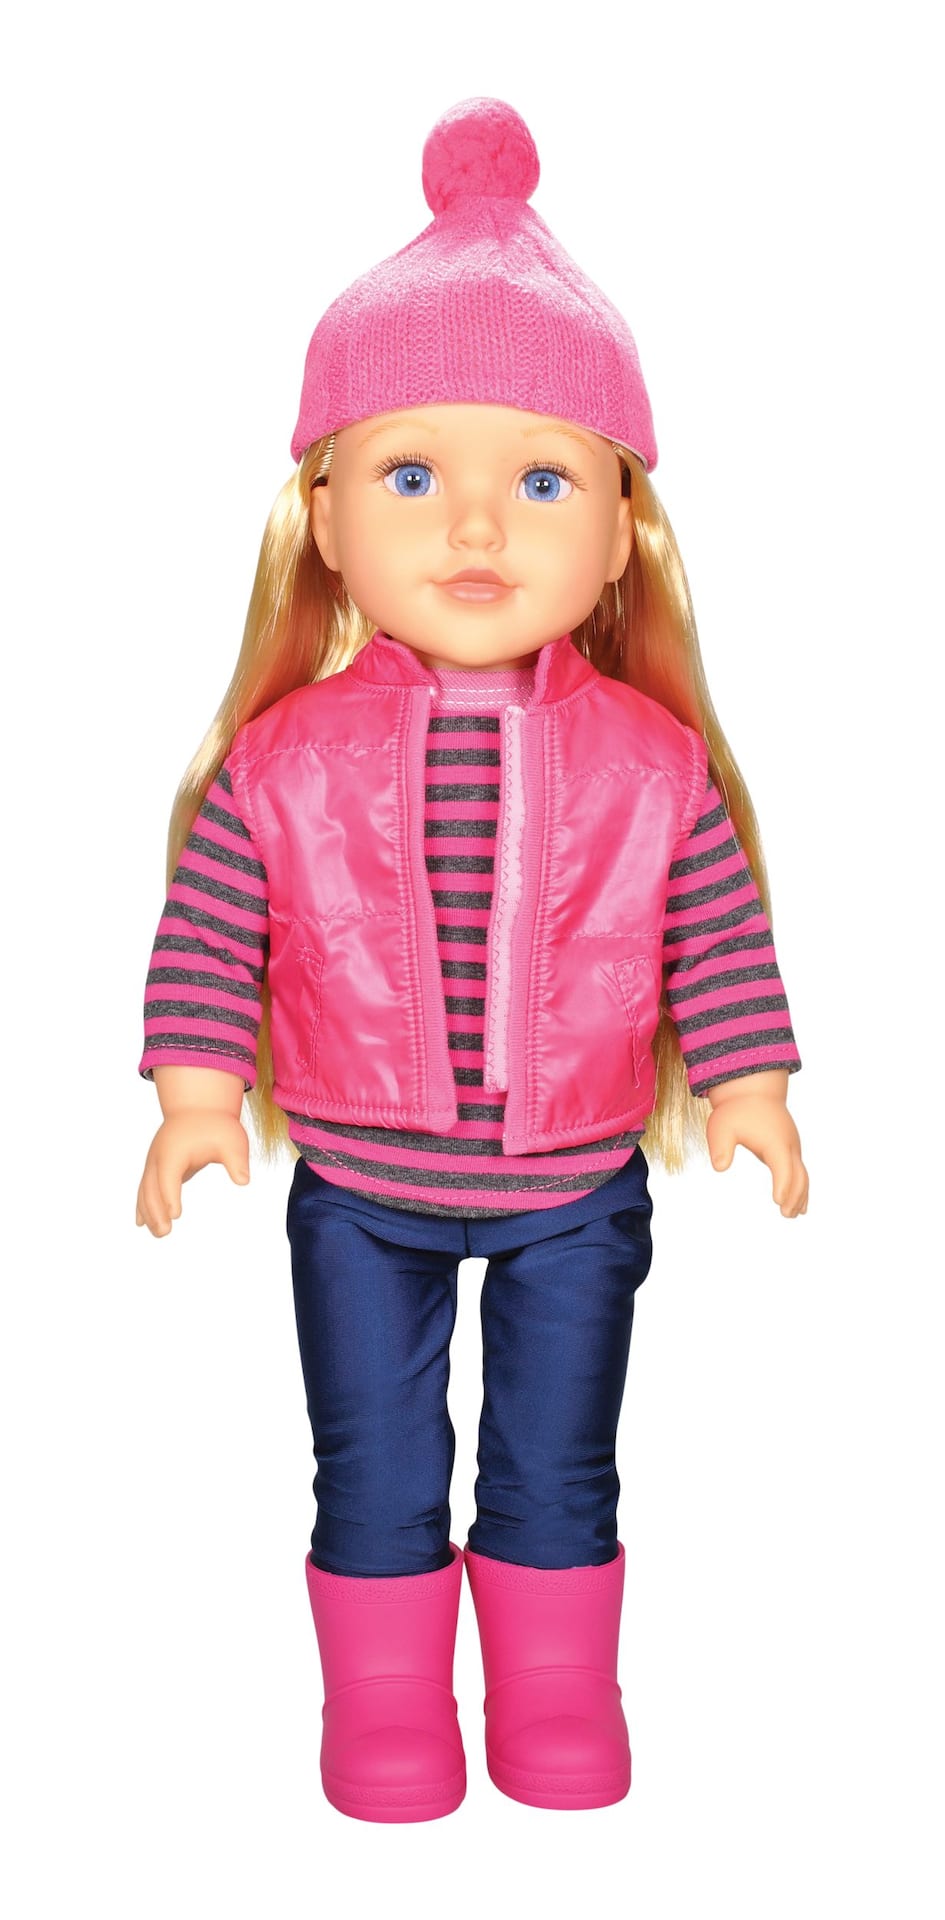 Wholesale yoga doll, Toy Doll Sets & Accessories 